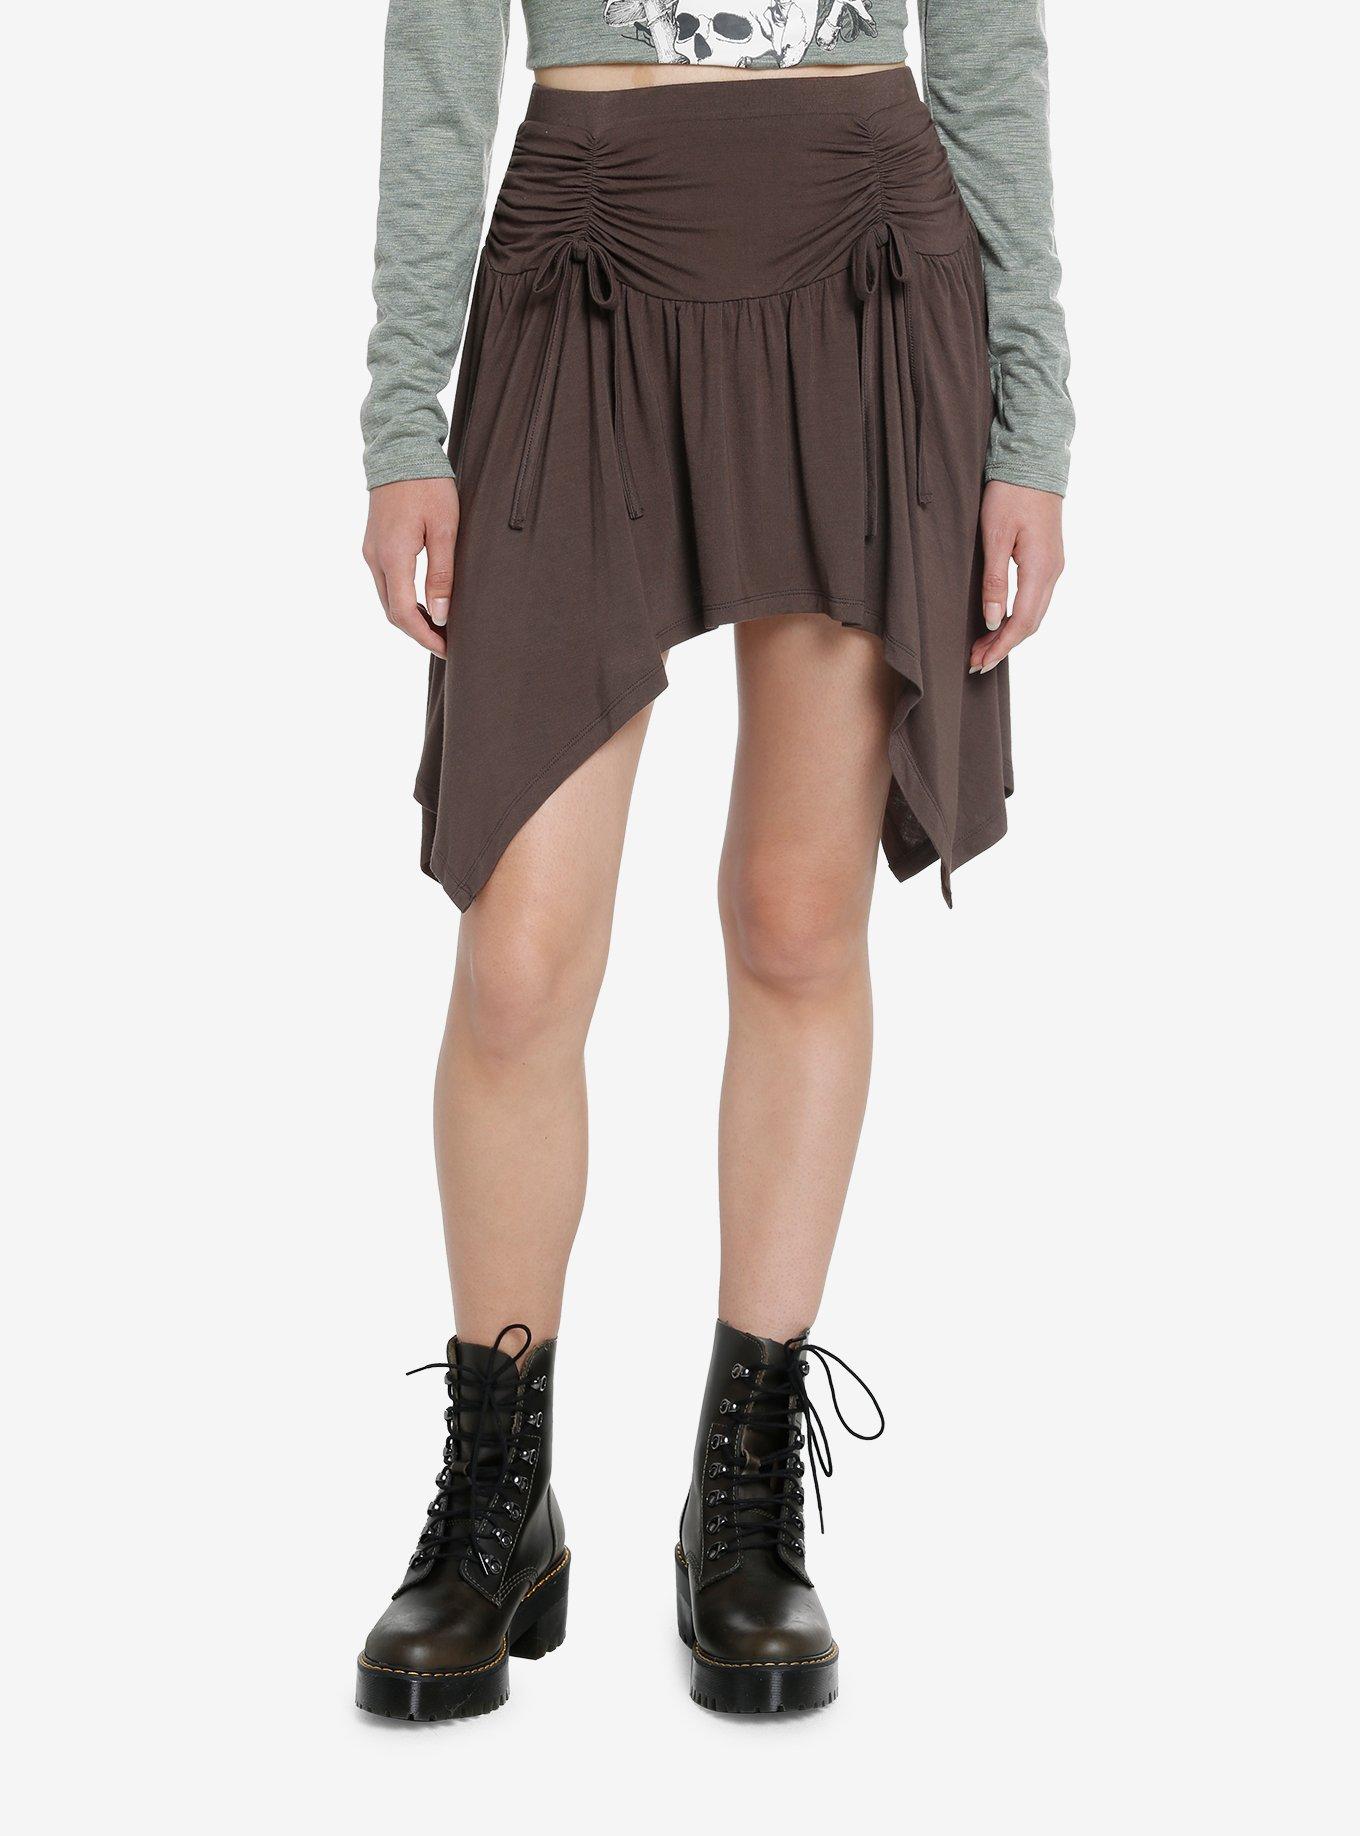 Thorn & Fable Grey Ruched Front Mini Skirt | Hot Topic